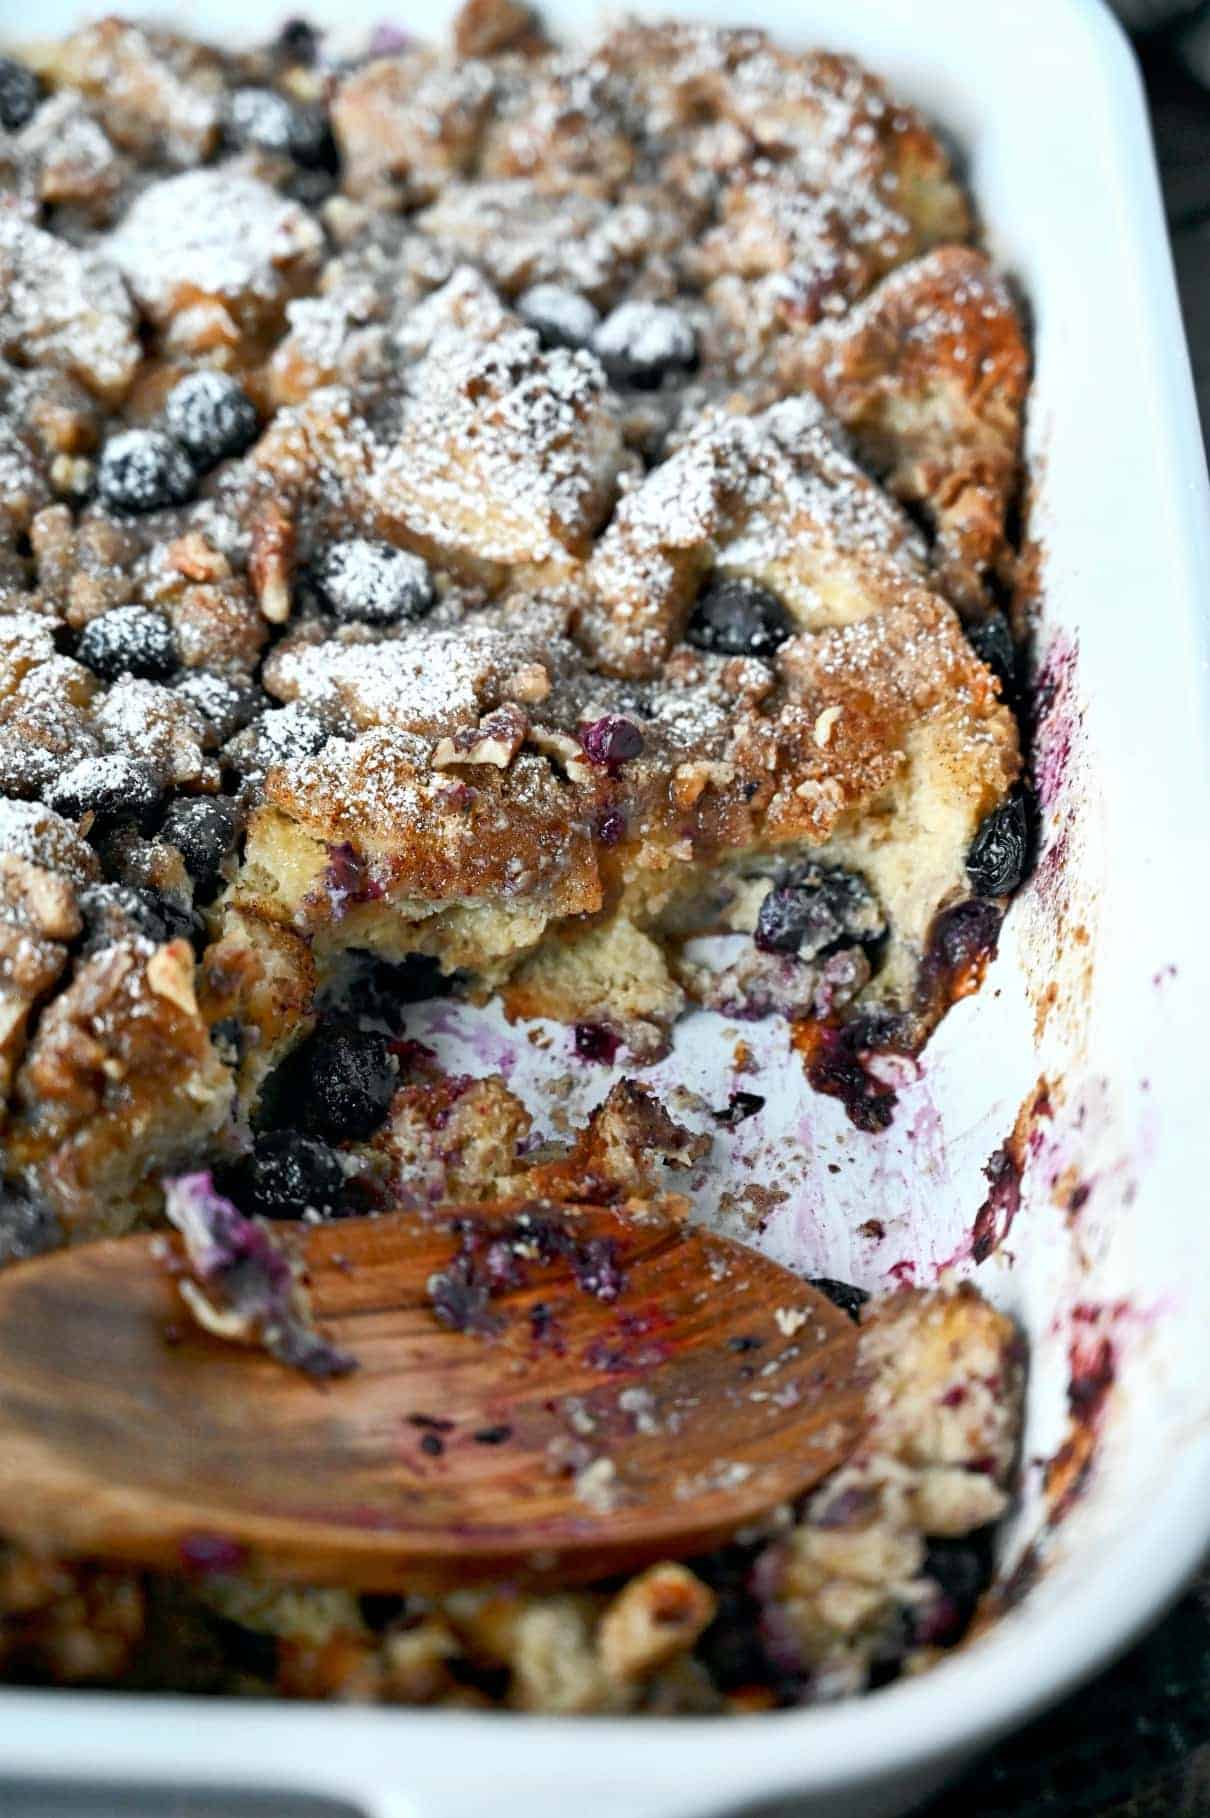 Blueberry french toast casserole in a white baking dish with a scoop missing and a wooden spoon.